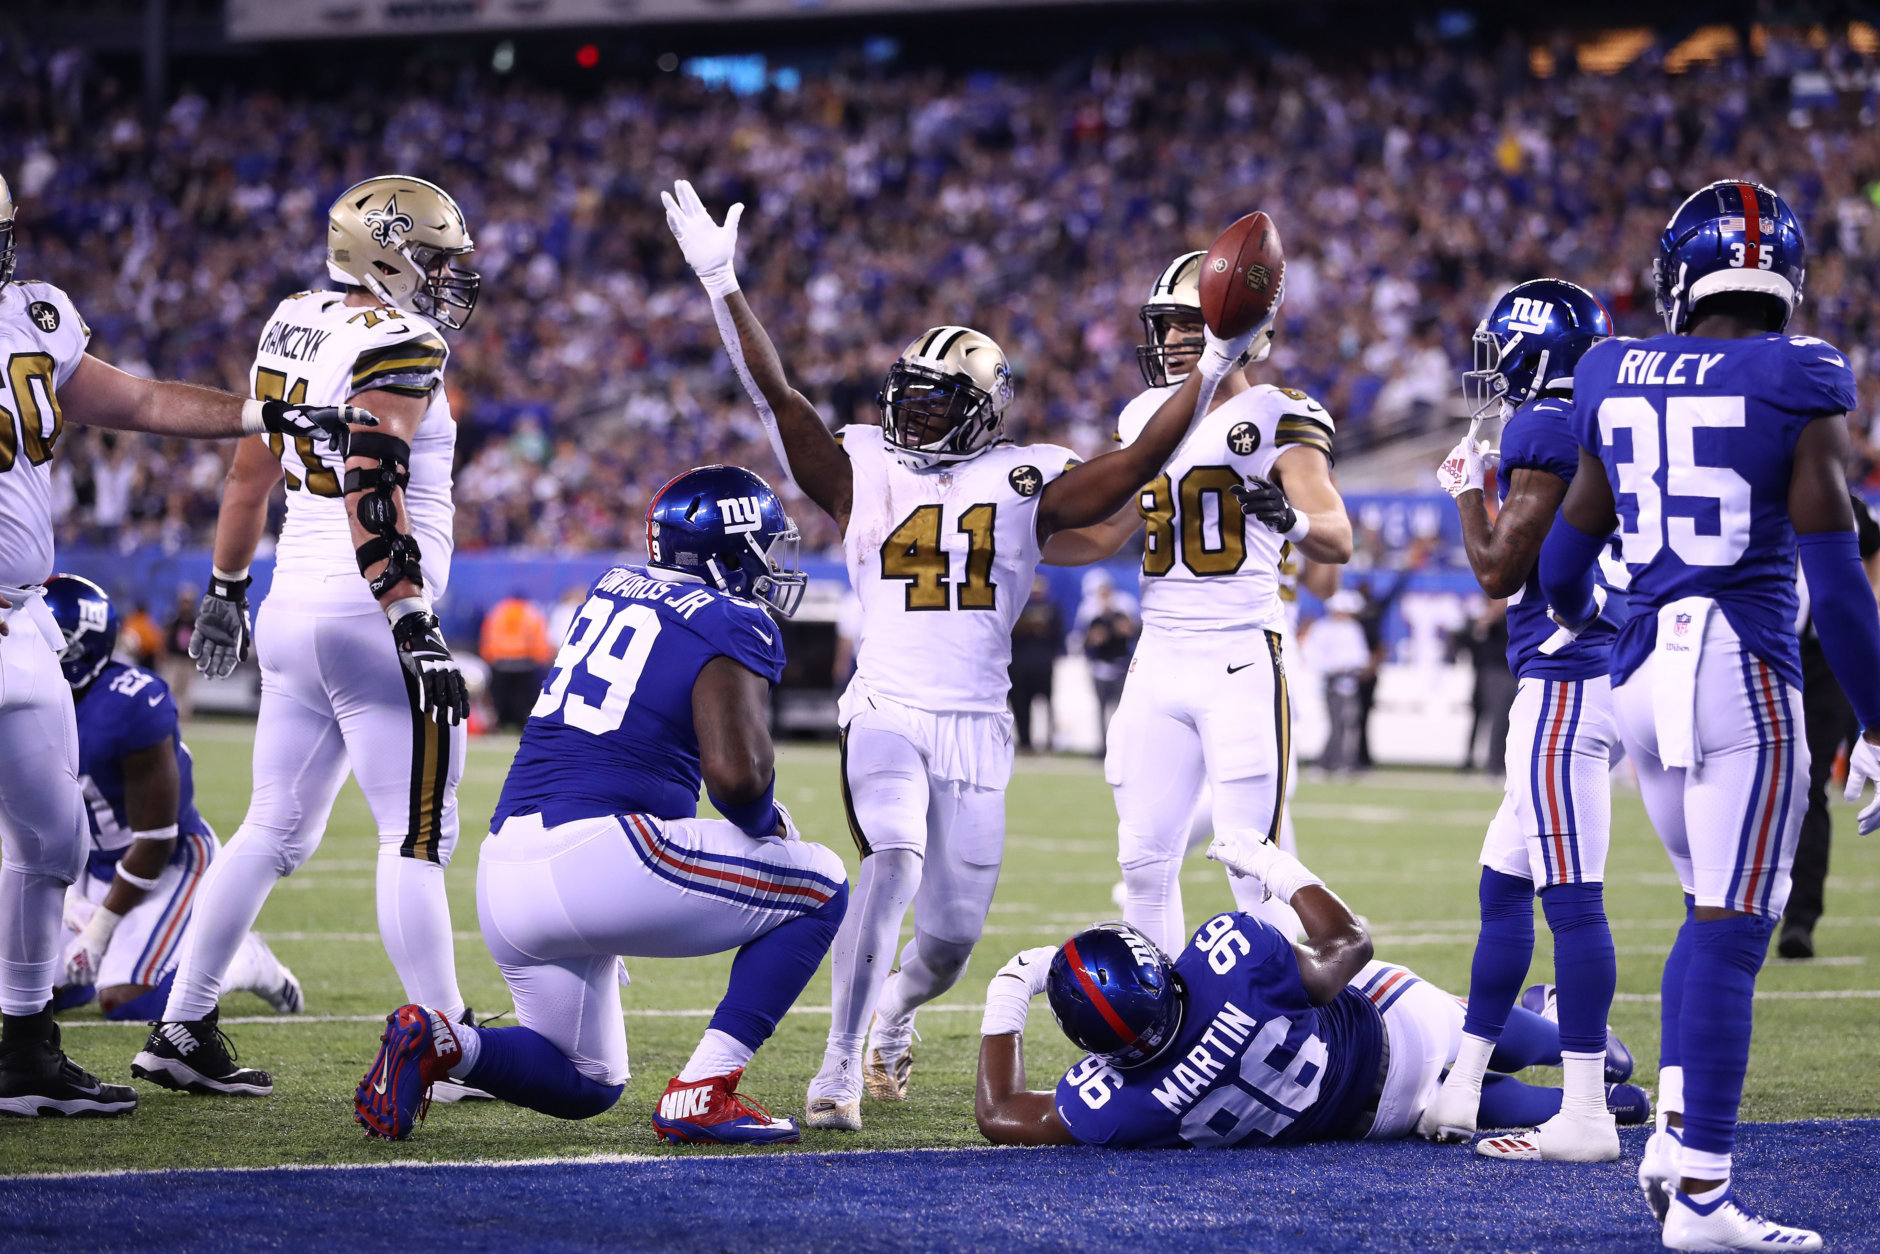 EAST RUTHERFORD, NEW JERSEY - SEPTEMBER 30:  Alvin Kamara #41 of the New Orleans Saints scores a touchdown against the New York Giants during their game at MetLife Stadium on September 30, 2018 in East Rutherford, New Jersey. (Photo by Al Bello/Getty Images)